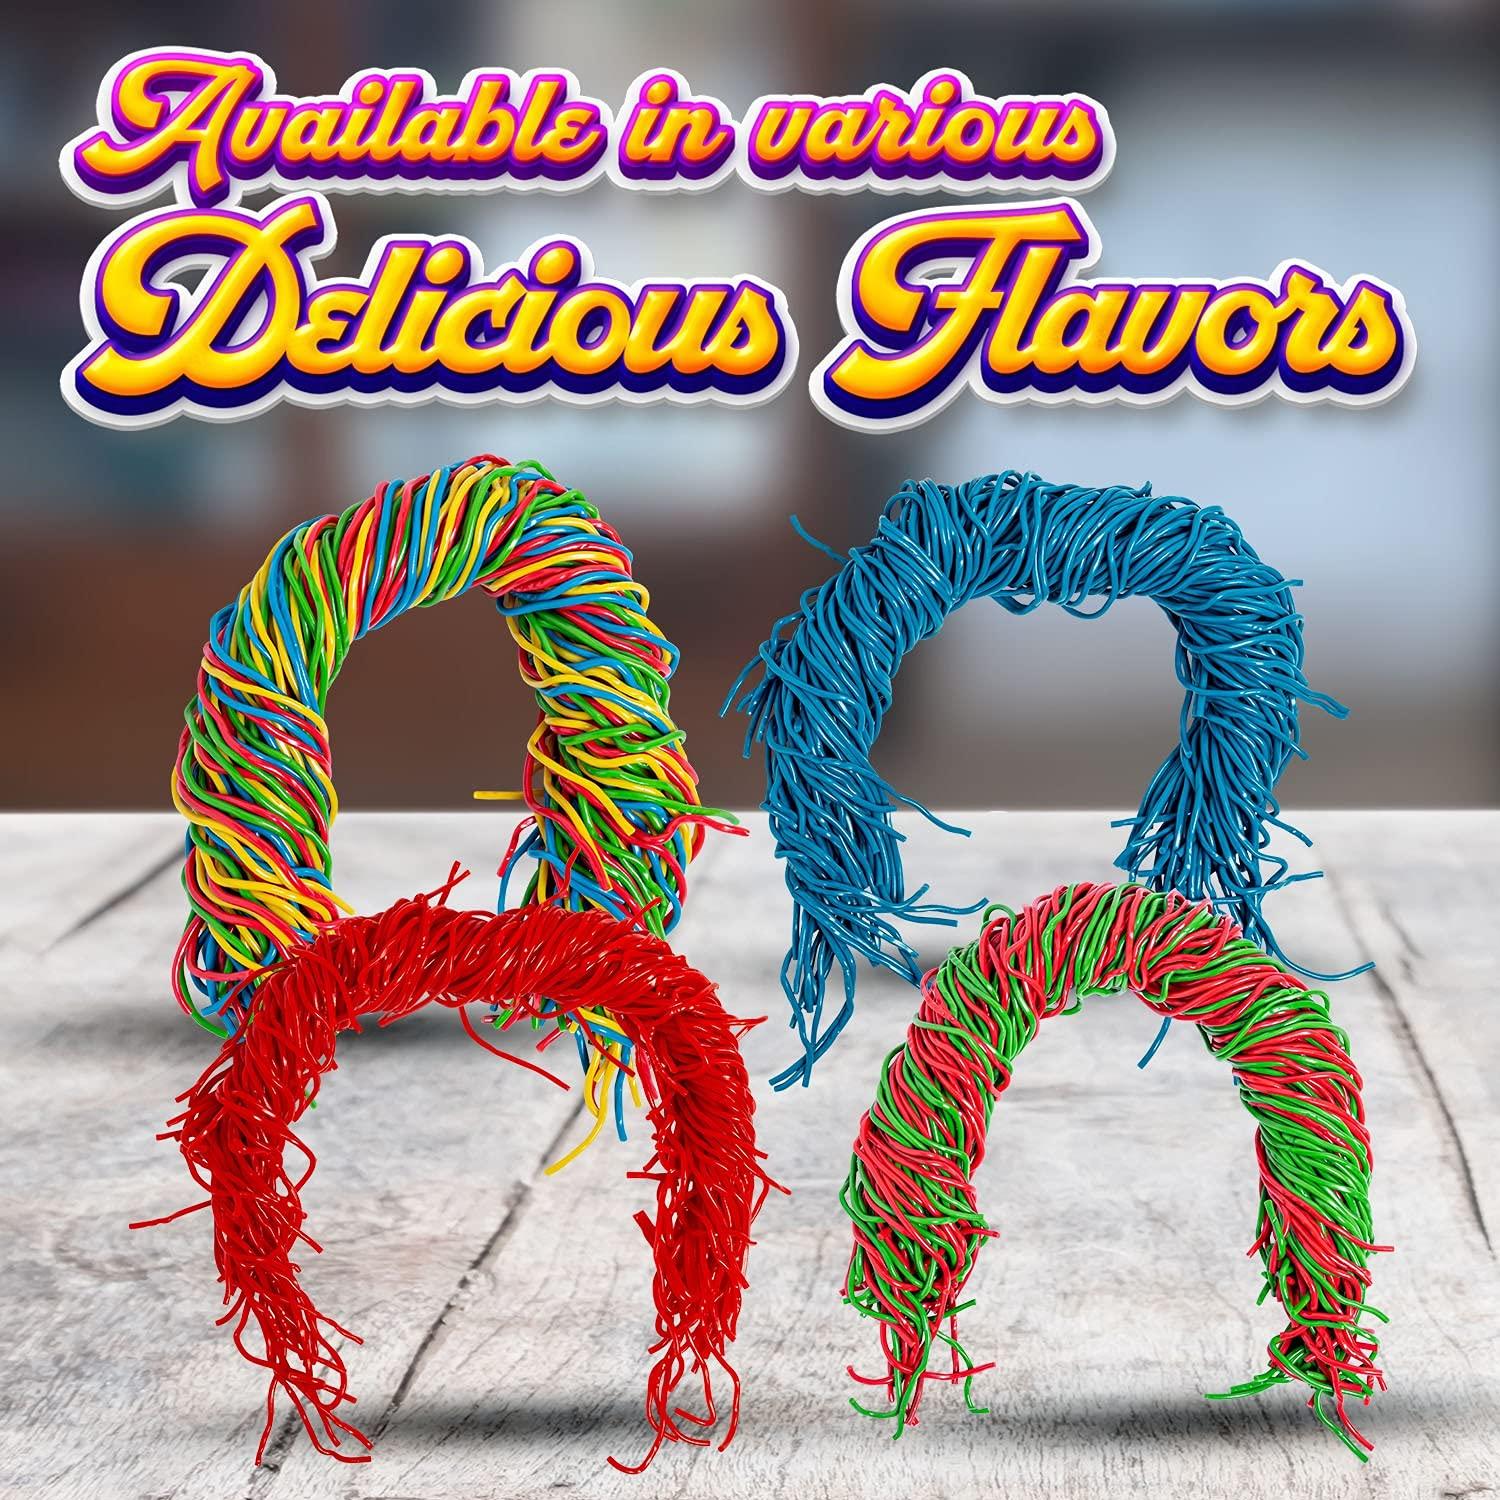 Mouth-Watering long straw candy In Exciting Flavors 